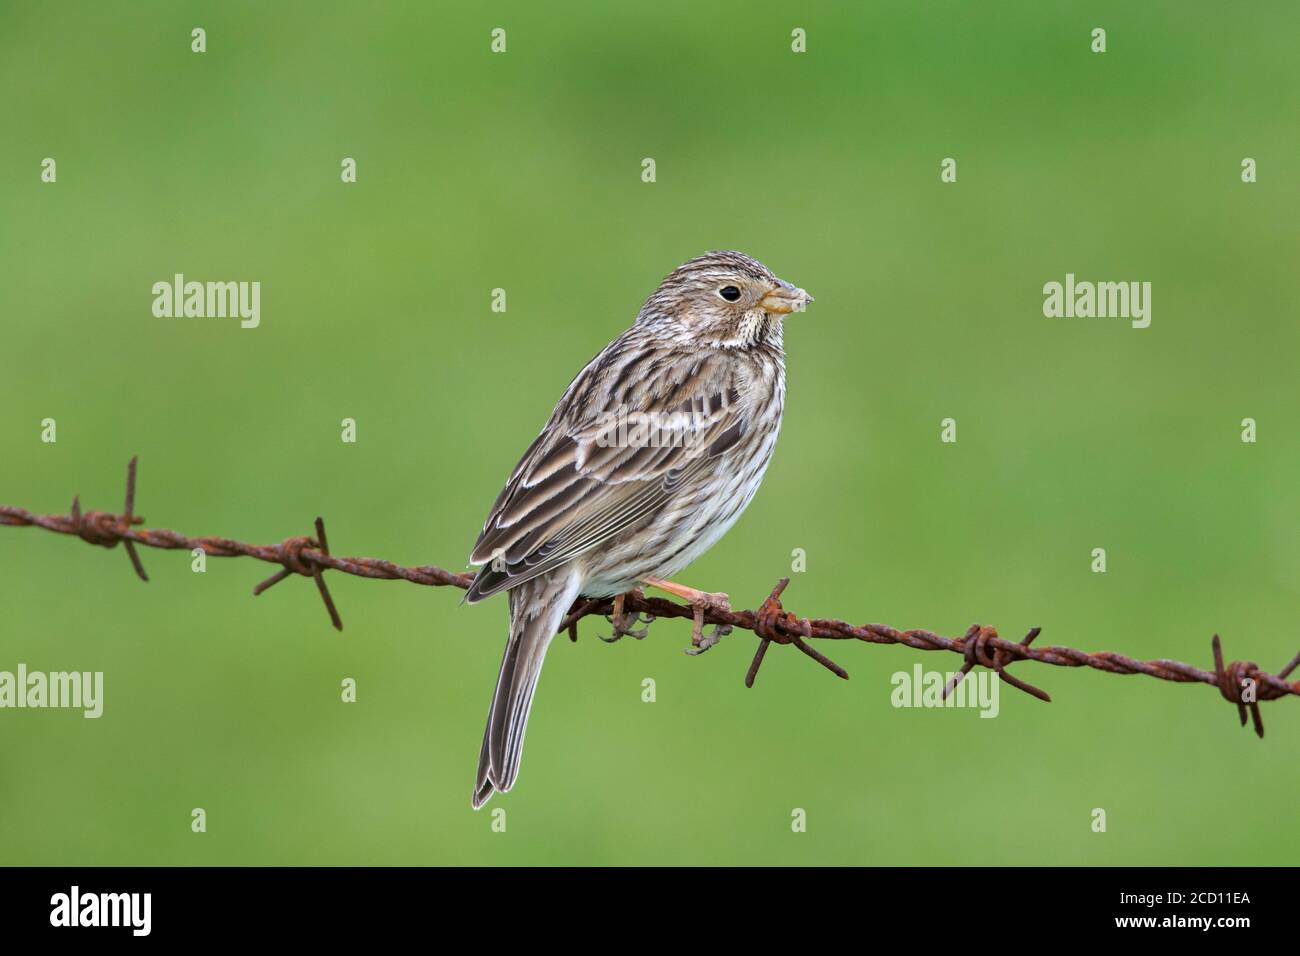 Corn bunting (Emberiza calandra / Miliaria calandra) perched on barbwire / barbed wire along meadow / field in spring Stock Photo